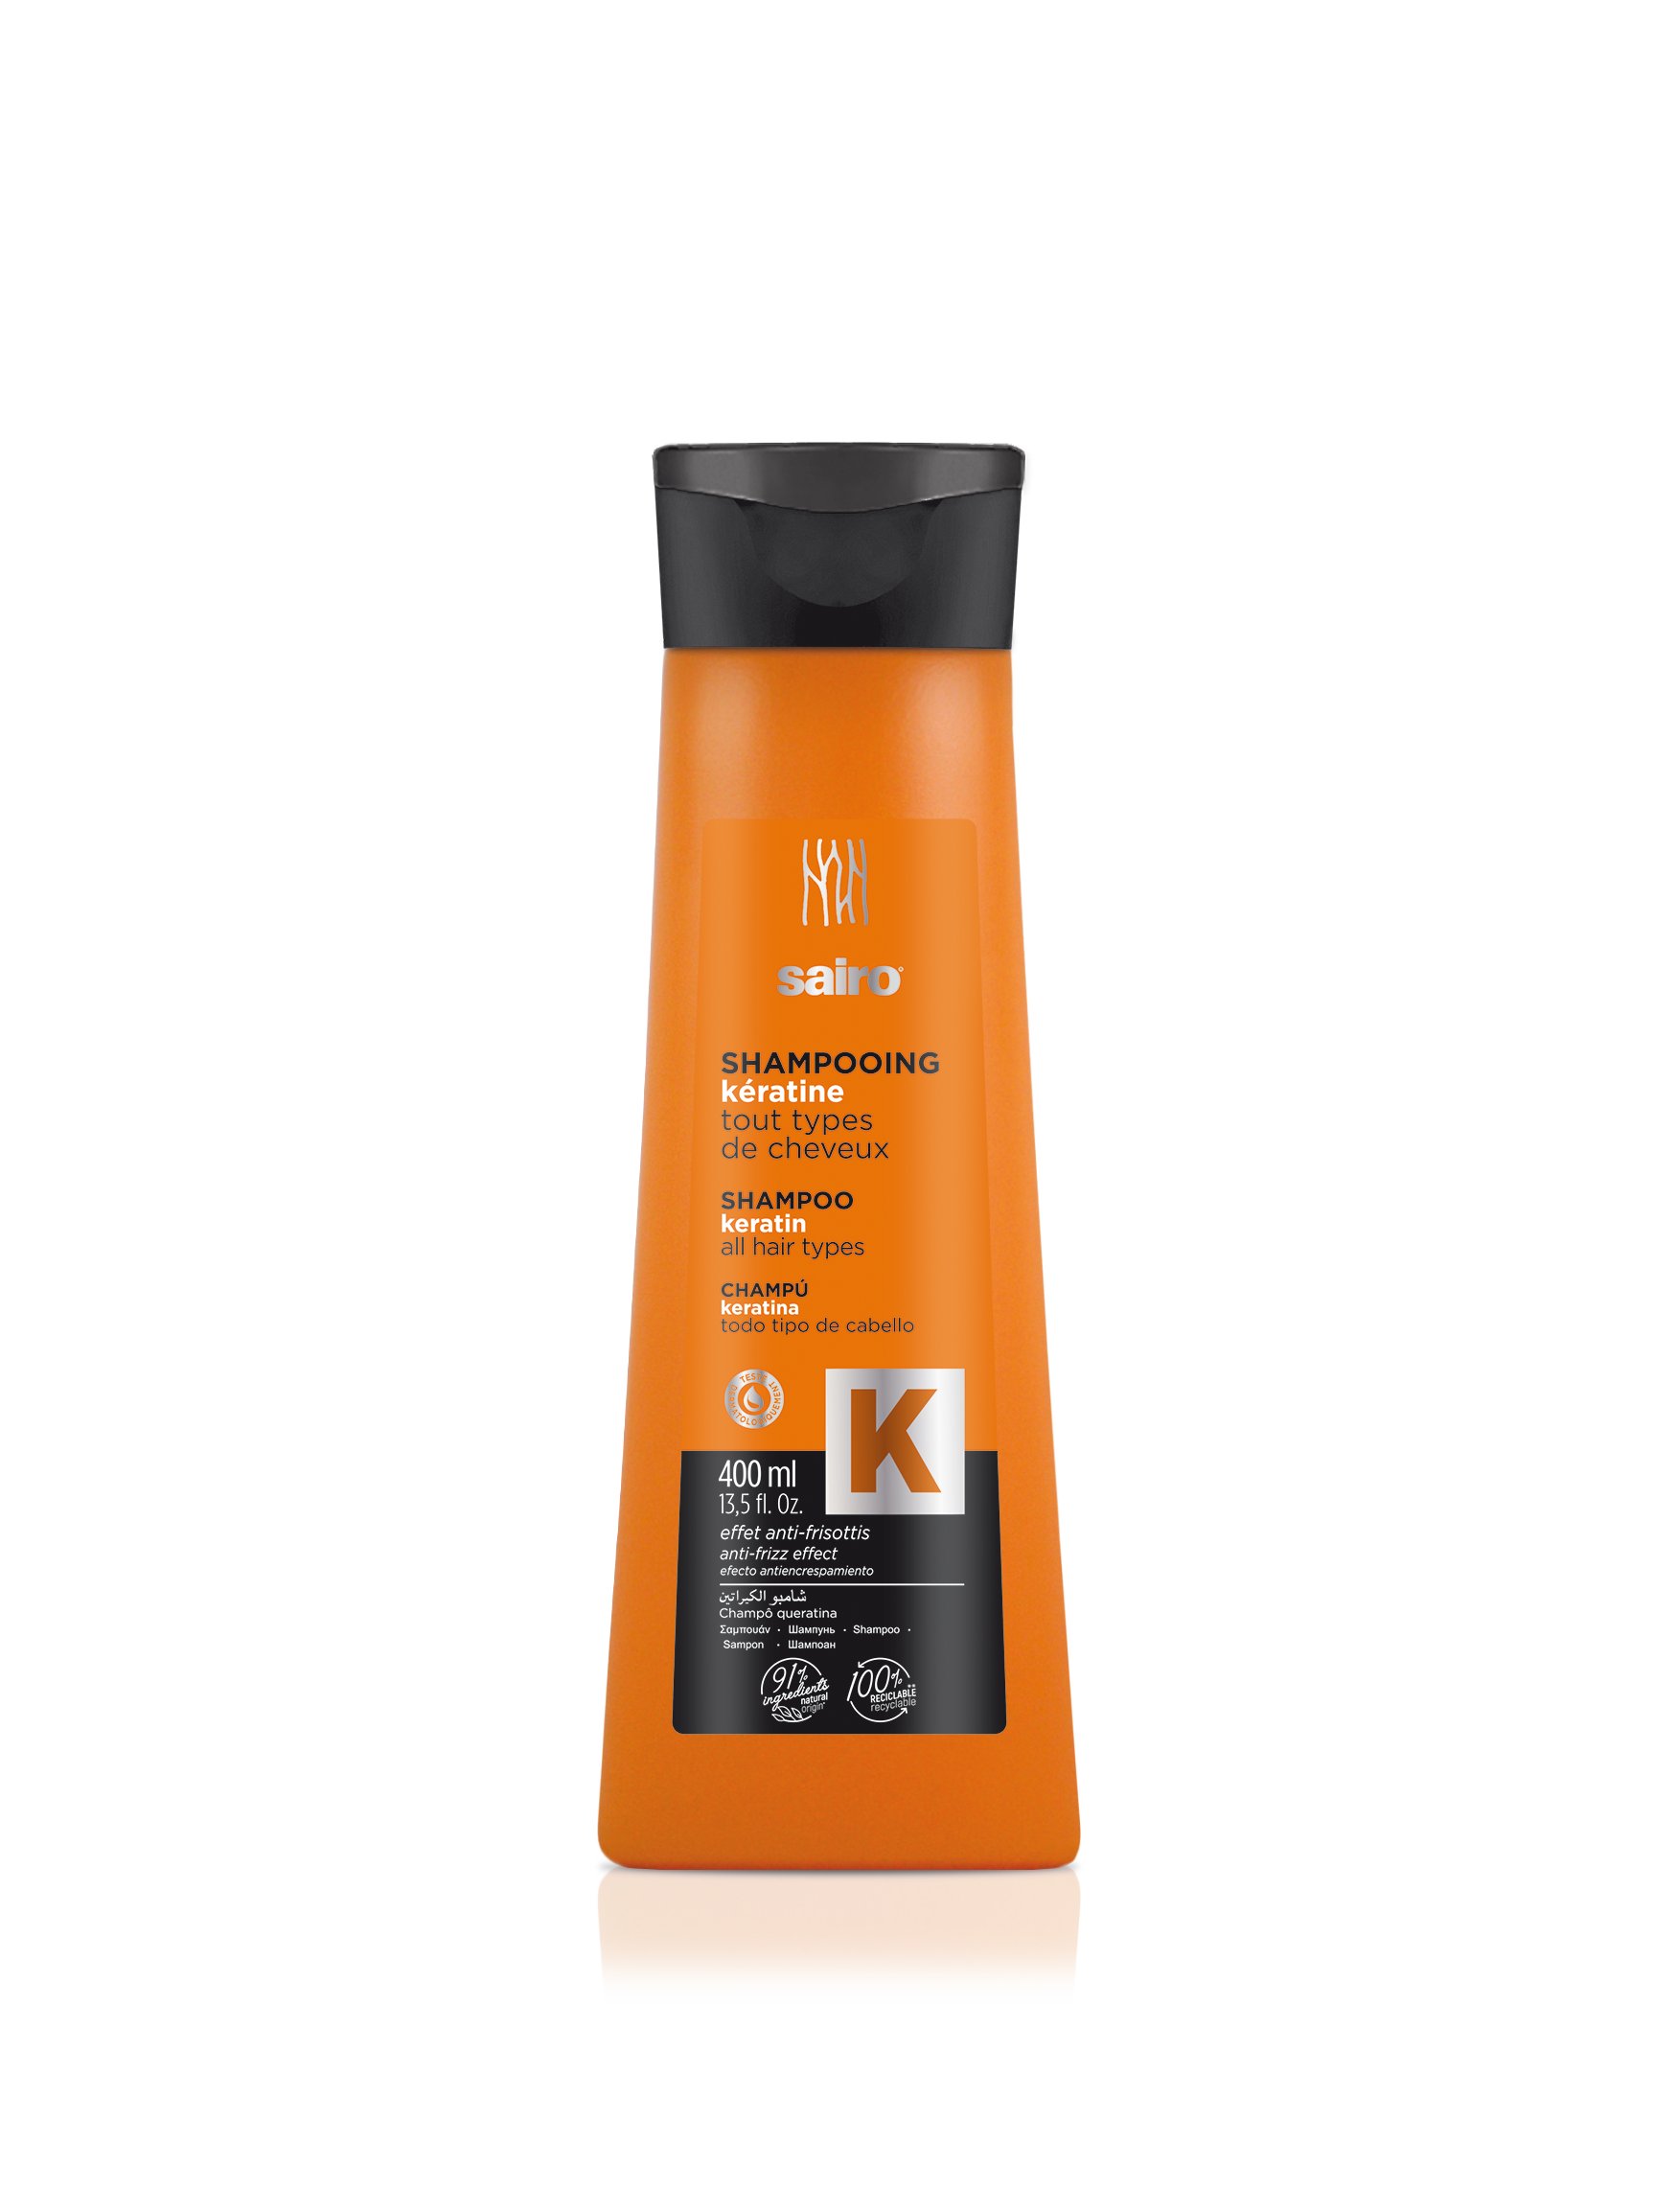 Shampooing kératine cheveux normaux 400 ml